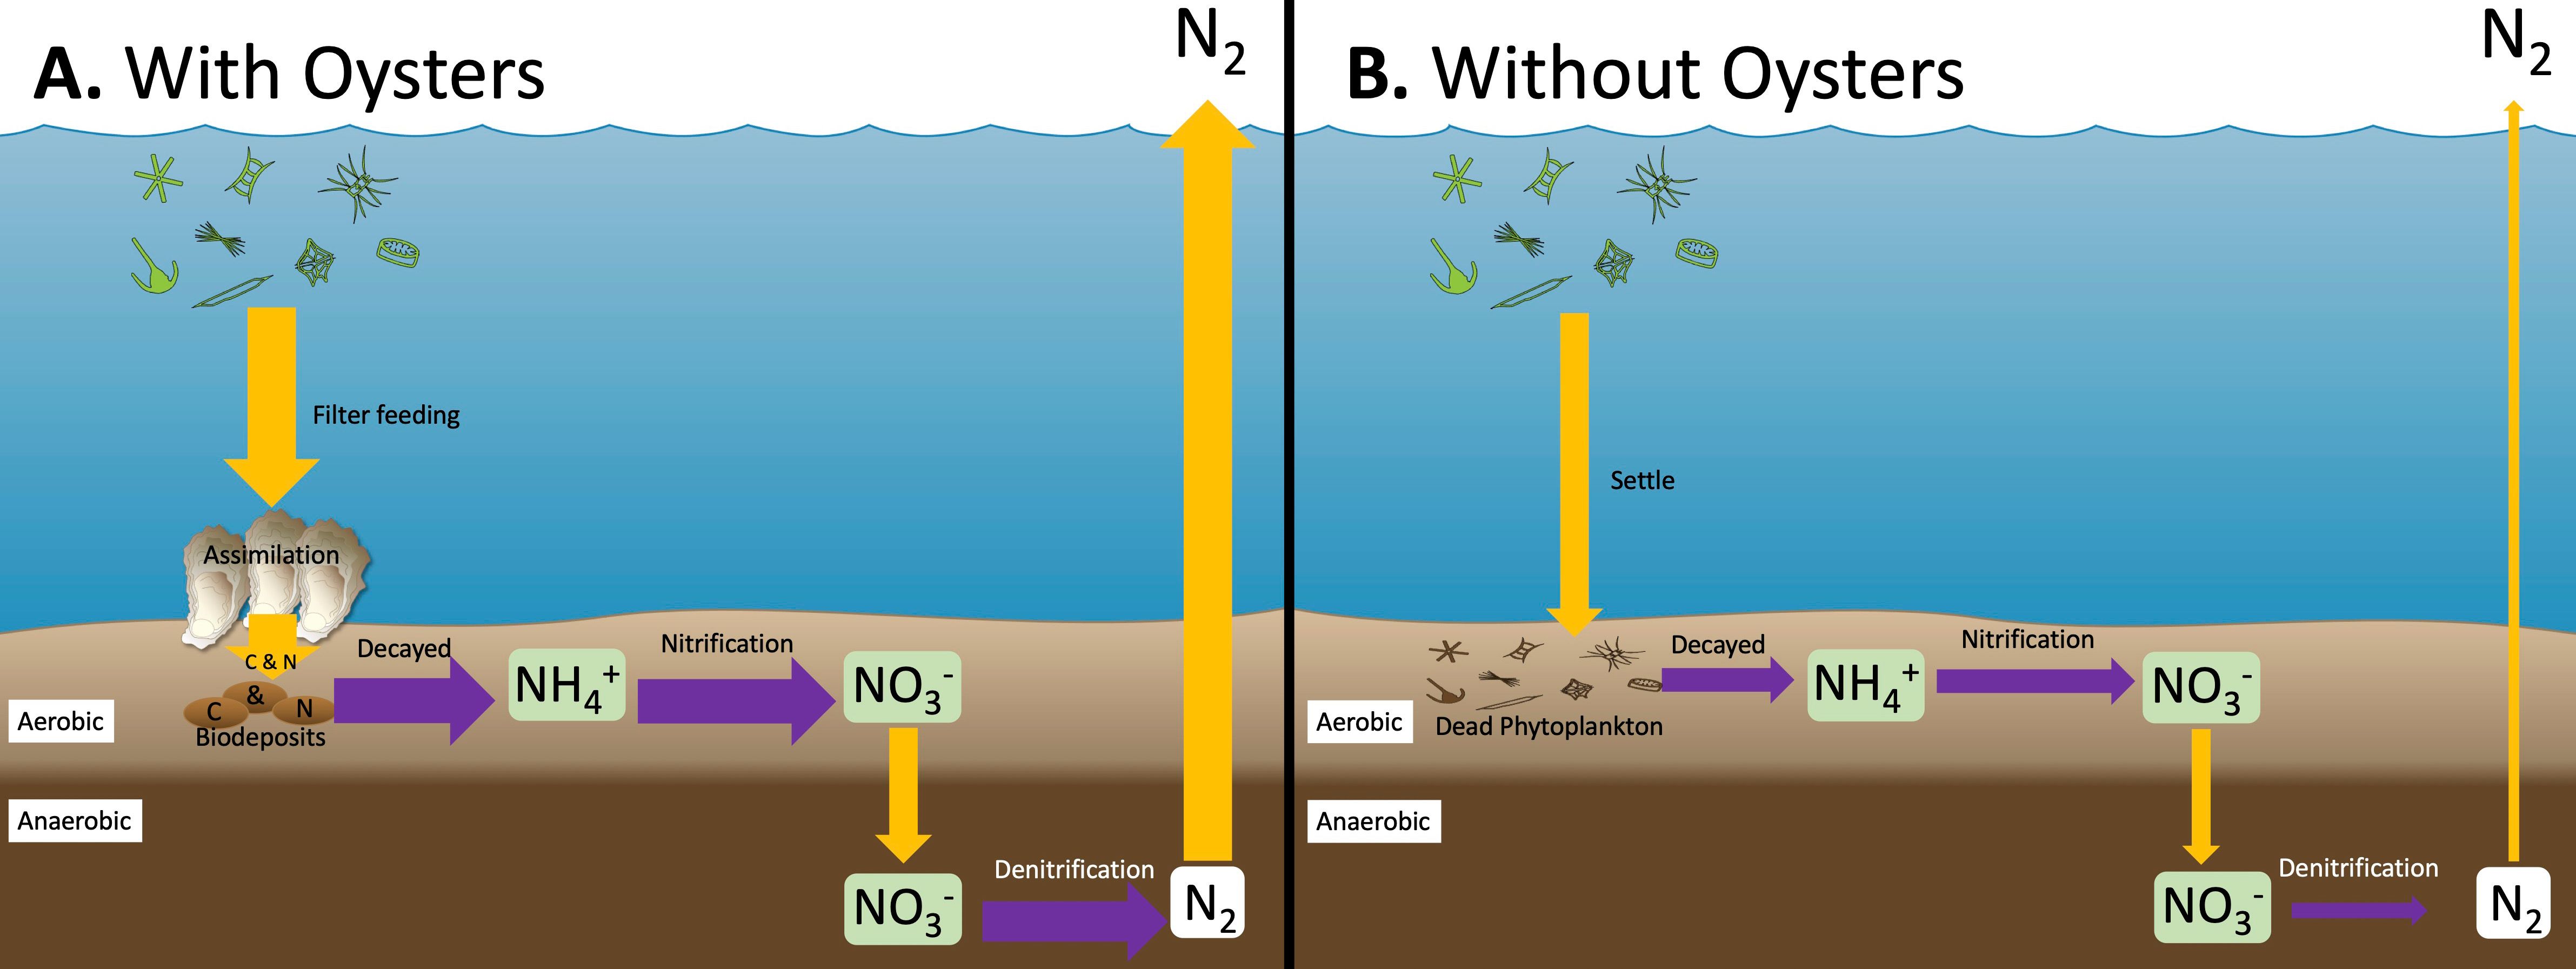 Sediment nitrogen cycling processes (A) with oysters and (B) without oysters. NH4+: Ammonium; NO3-: Nitrate; N2: Dinitrogen gas. Purple arrows represent transformations performed by microbes within the sediment. Green boxes represent reactive nitrogen forms, and white boxes represent unusable nitrogen forms. Note: The size of the arrows are relative to the predicted rates of each process.